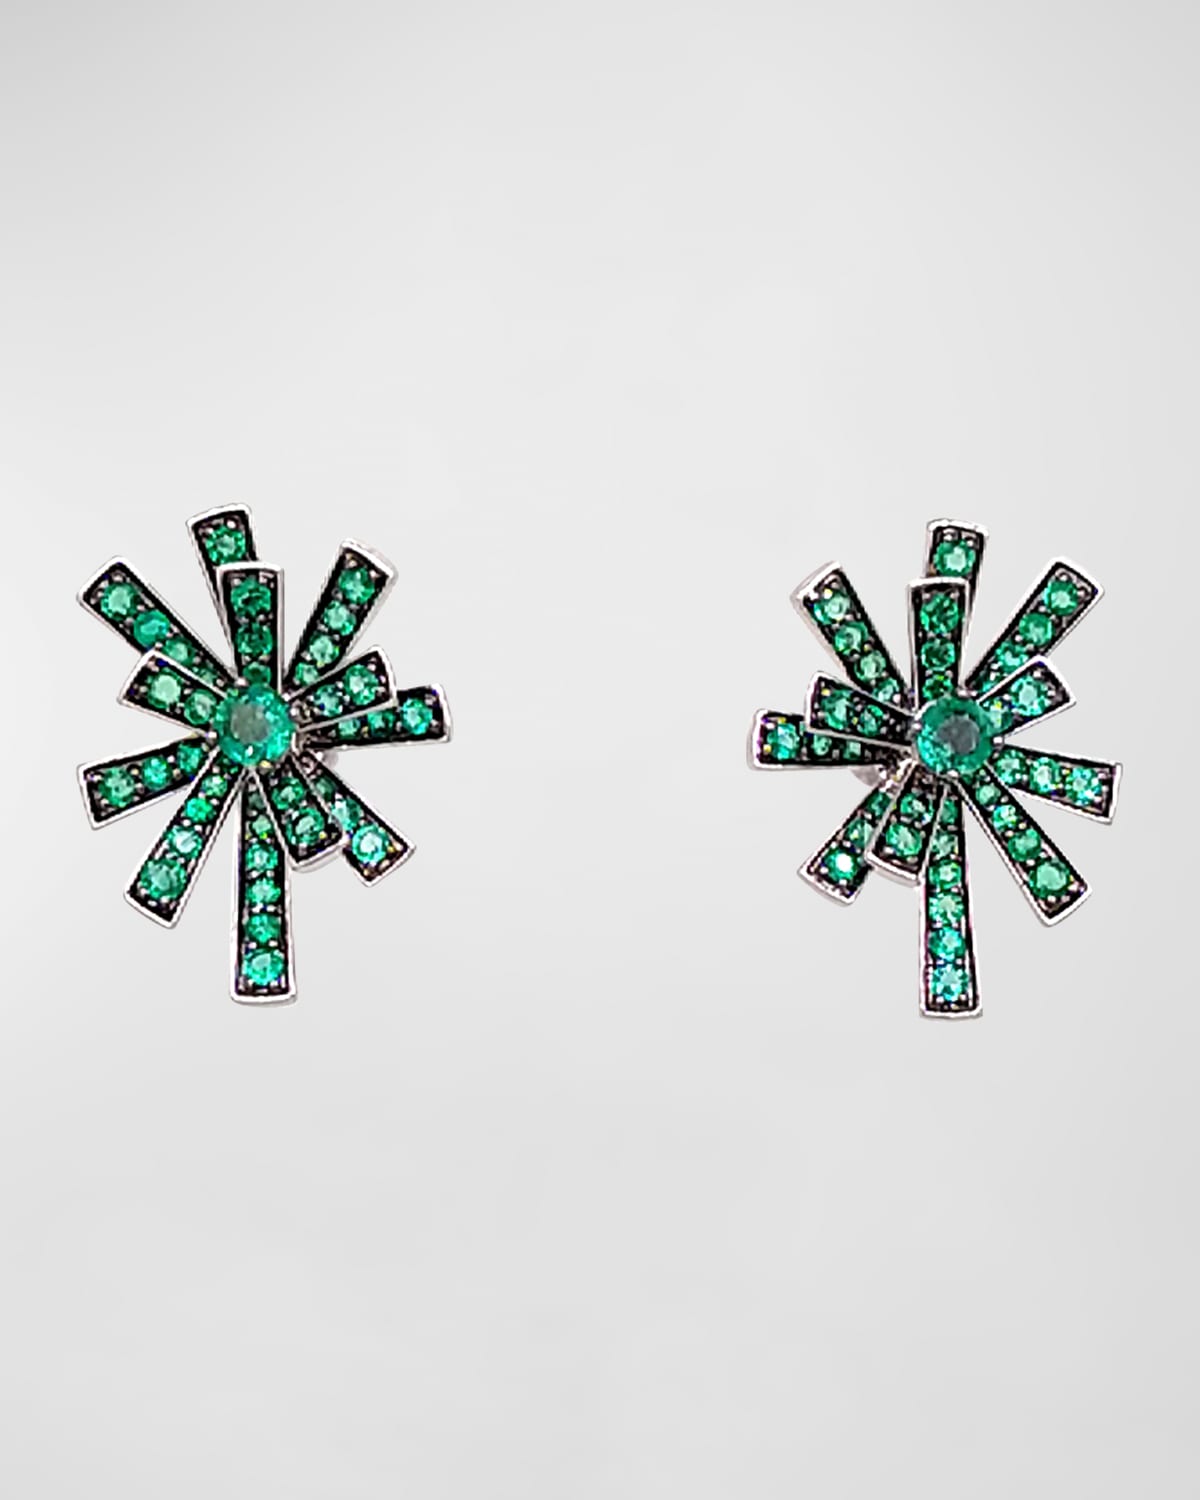 18K Tribal White Gold and Black Rhodium Earrings with Green Emeralds